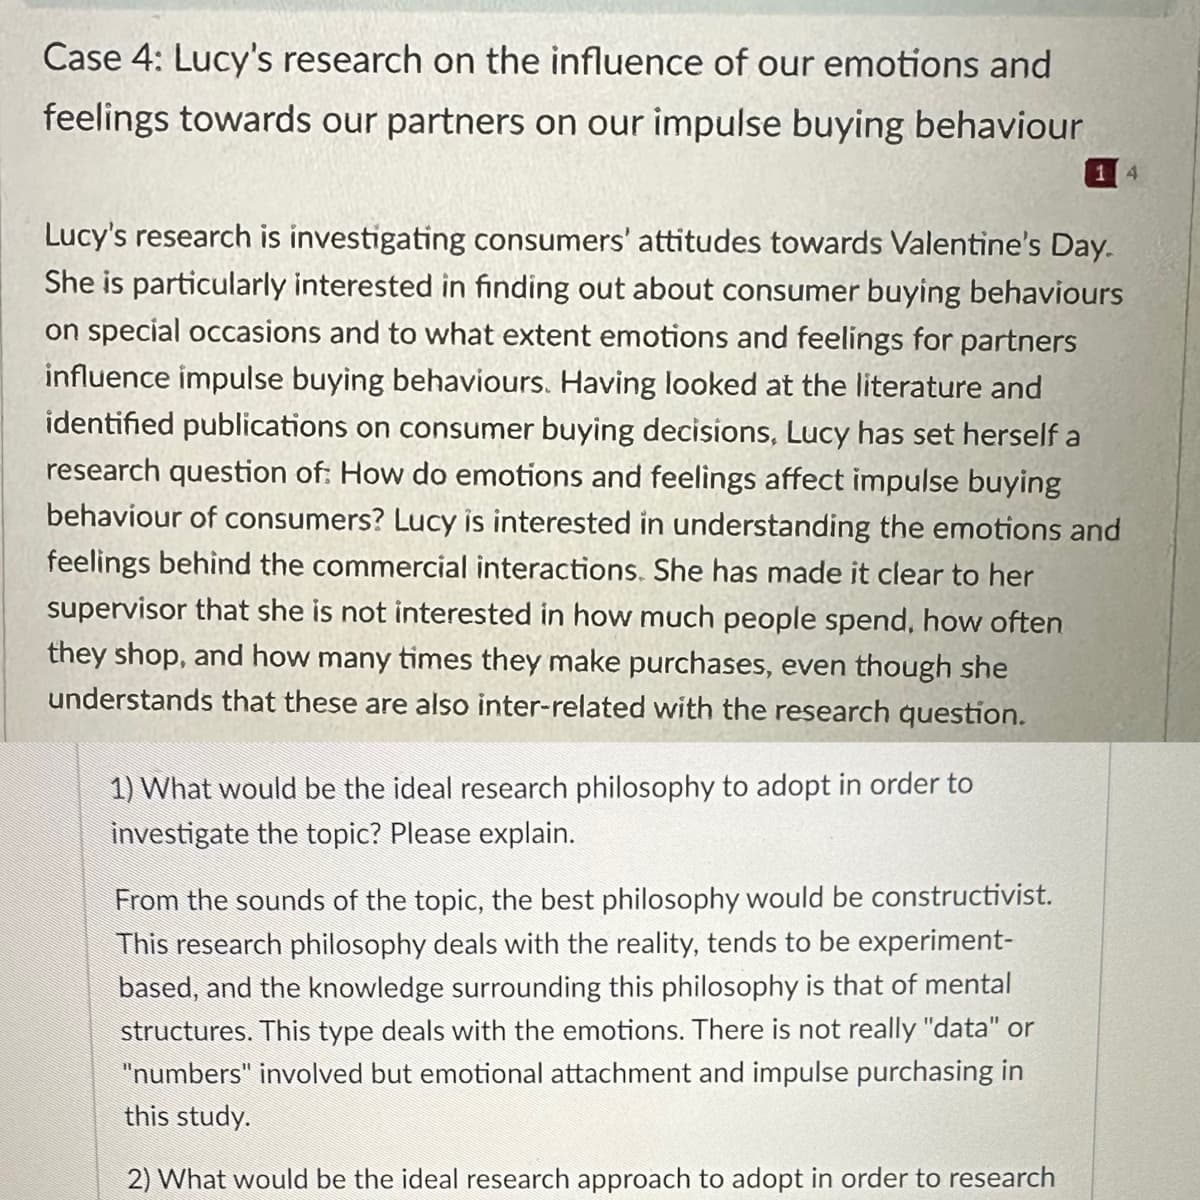 Case 4: Lucy's research on the influence of our emotions and
feelings towards our partners on our impulse buying behaviour
Lucy's research is investigating consumers' attitudes towards Valentine's Day.
She is particularly interested in finding out about consumer buying behaviours
on special occasions and to what extent emotions and feelings for partners
influence impulse buying behaviours. Having looked at the literature and
identified publications on consumer buying decisions, Lucy has set herself a
research question of: How do emotions and feelings affect impulse buying
behaviour of consumers? Lucy is interested in understanding the emotions and
feelings behind the commercial interactions. She has made it clear to her
supervisor that she is not interested in how much people spend, how often
they shop, and how many times they make purchases, even though she
understands that these are also inter-related with the research question.
1) What would be the ideal research philosophy to adopt in order to
investigate the topic? Please explain.
14
From the sounds of the topic, the best philosophy would be constructivist.
This research philosophy deals with the reality, tends to be experiment-
based, and the knowledge surrounding this philosophy is that of mental
structures. This type deals with the emotions. There is not really "data" or
"numbers" involved but emotional attachment and impulse purchasing in
this study.
2) What would be the ideal research approach to adopt in order to research